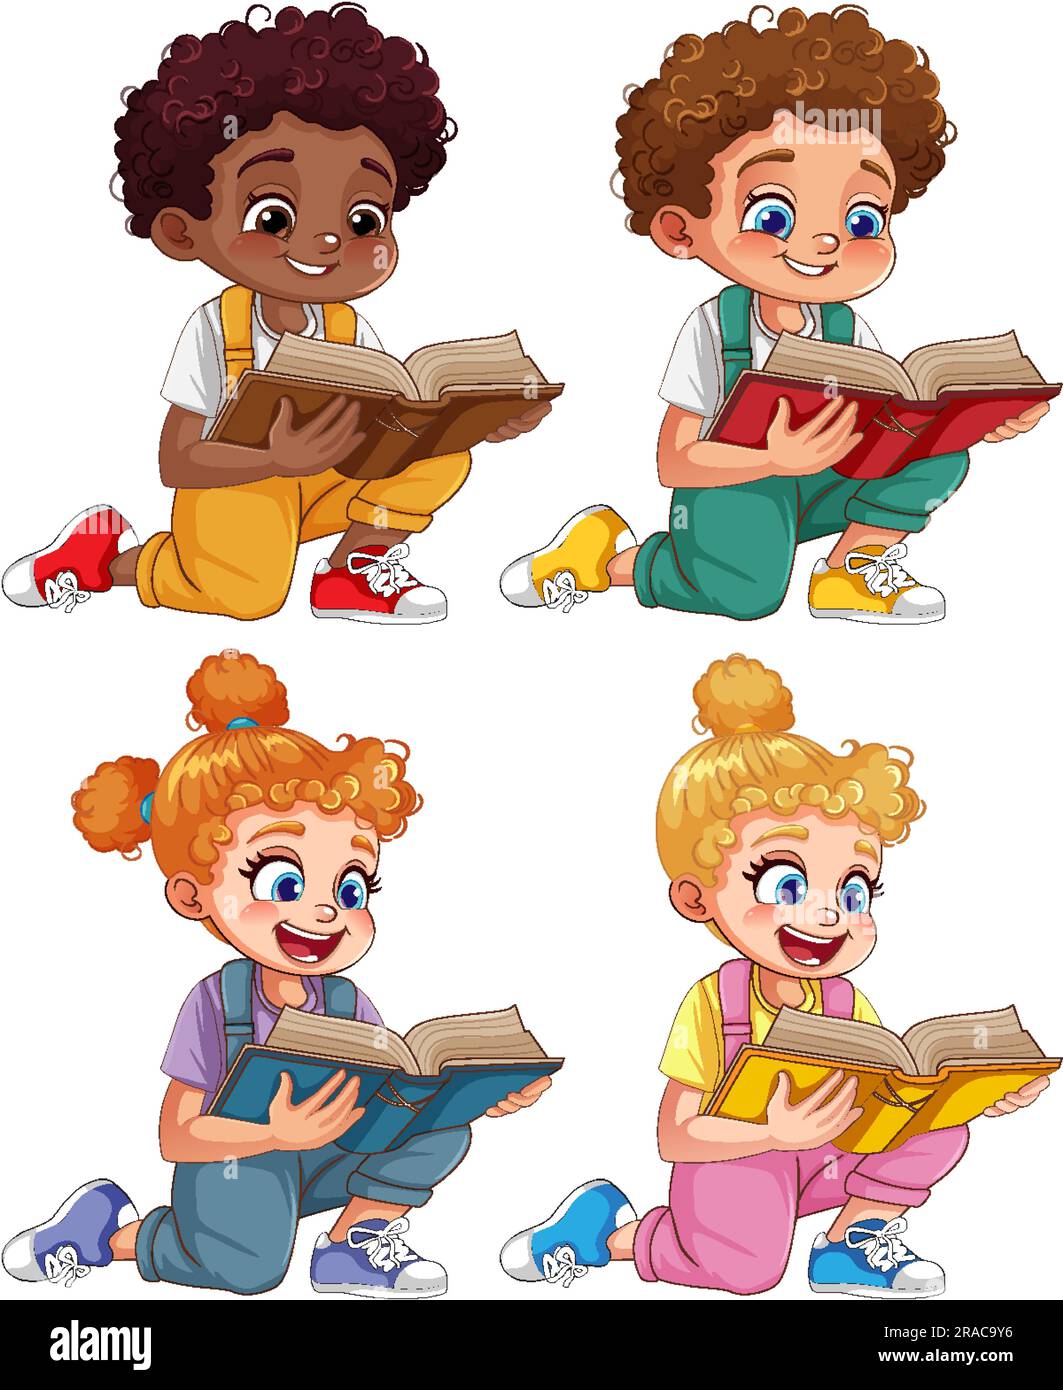 Set of boy and girl with curly hair in different skin colour reading a book illustration Stock Vector